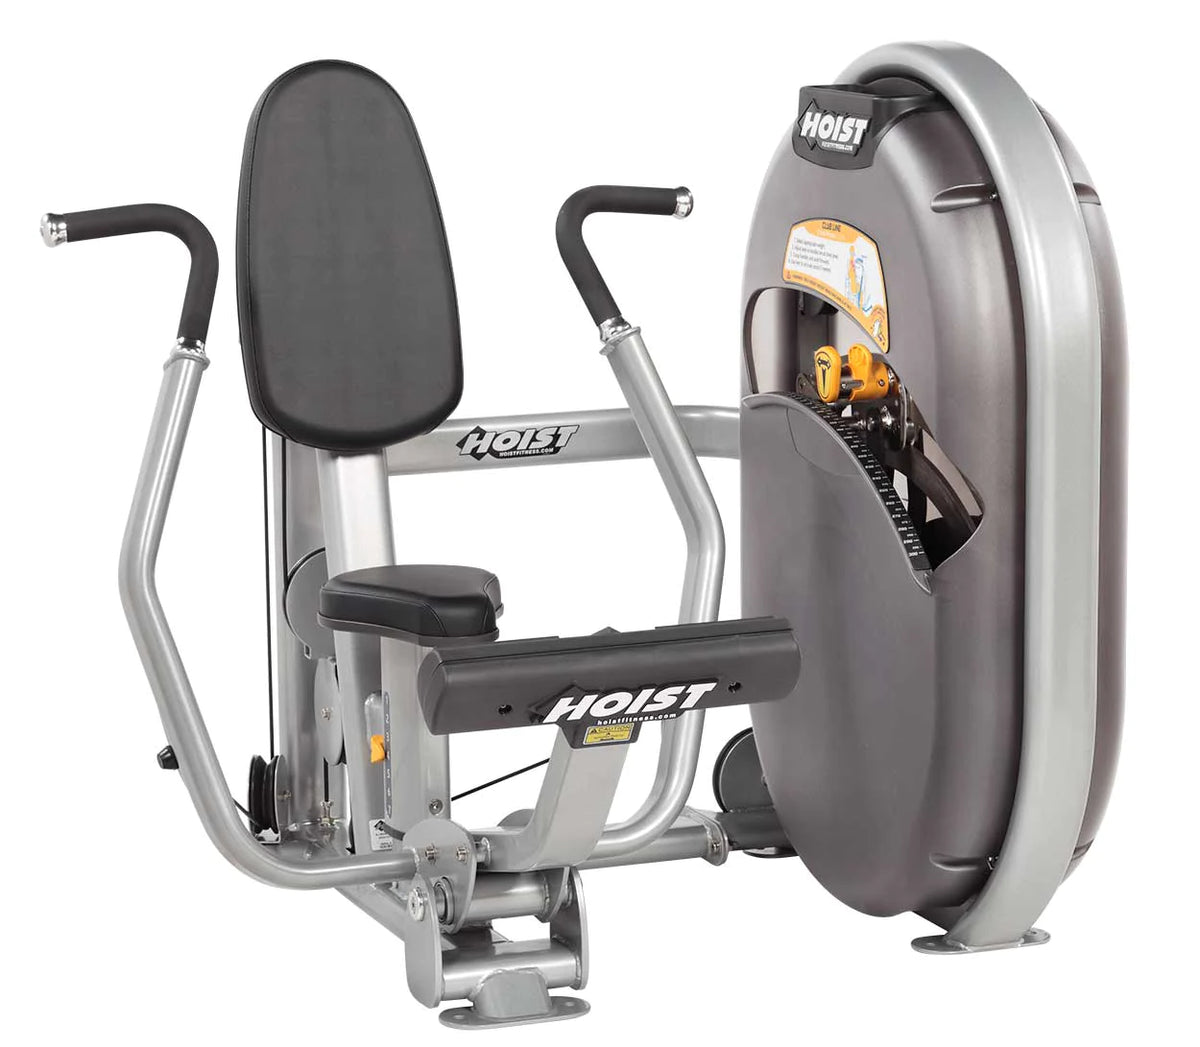 Hoist Fitness CL-3301 Chest Press full view | Fitness Experience